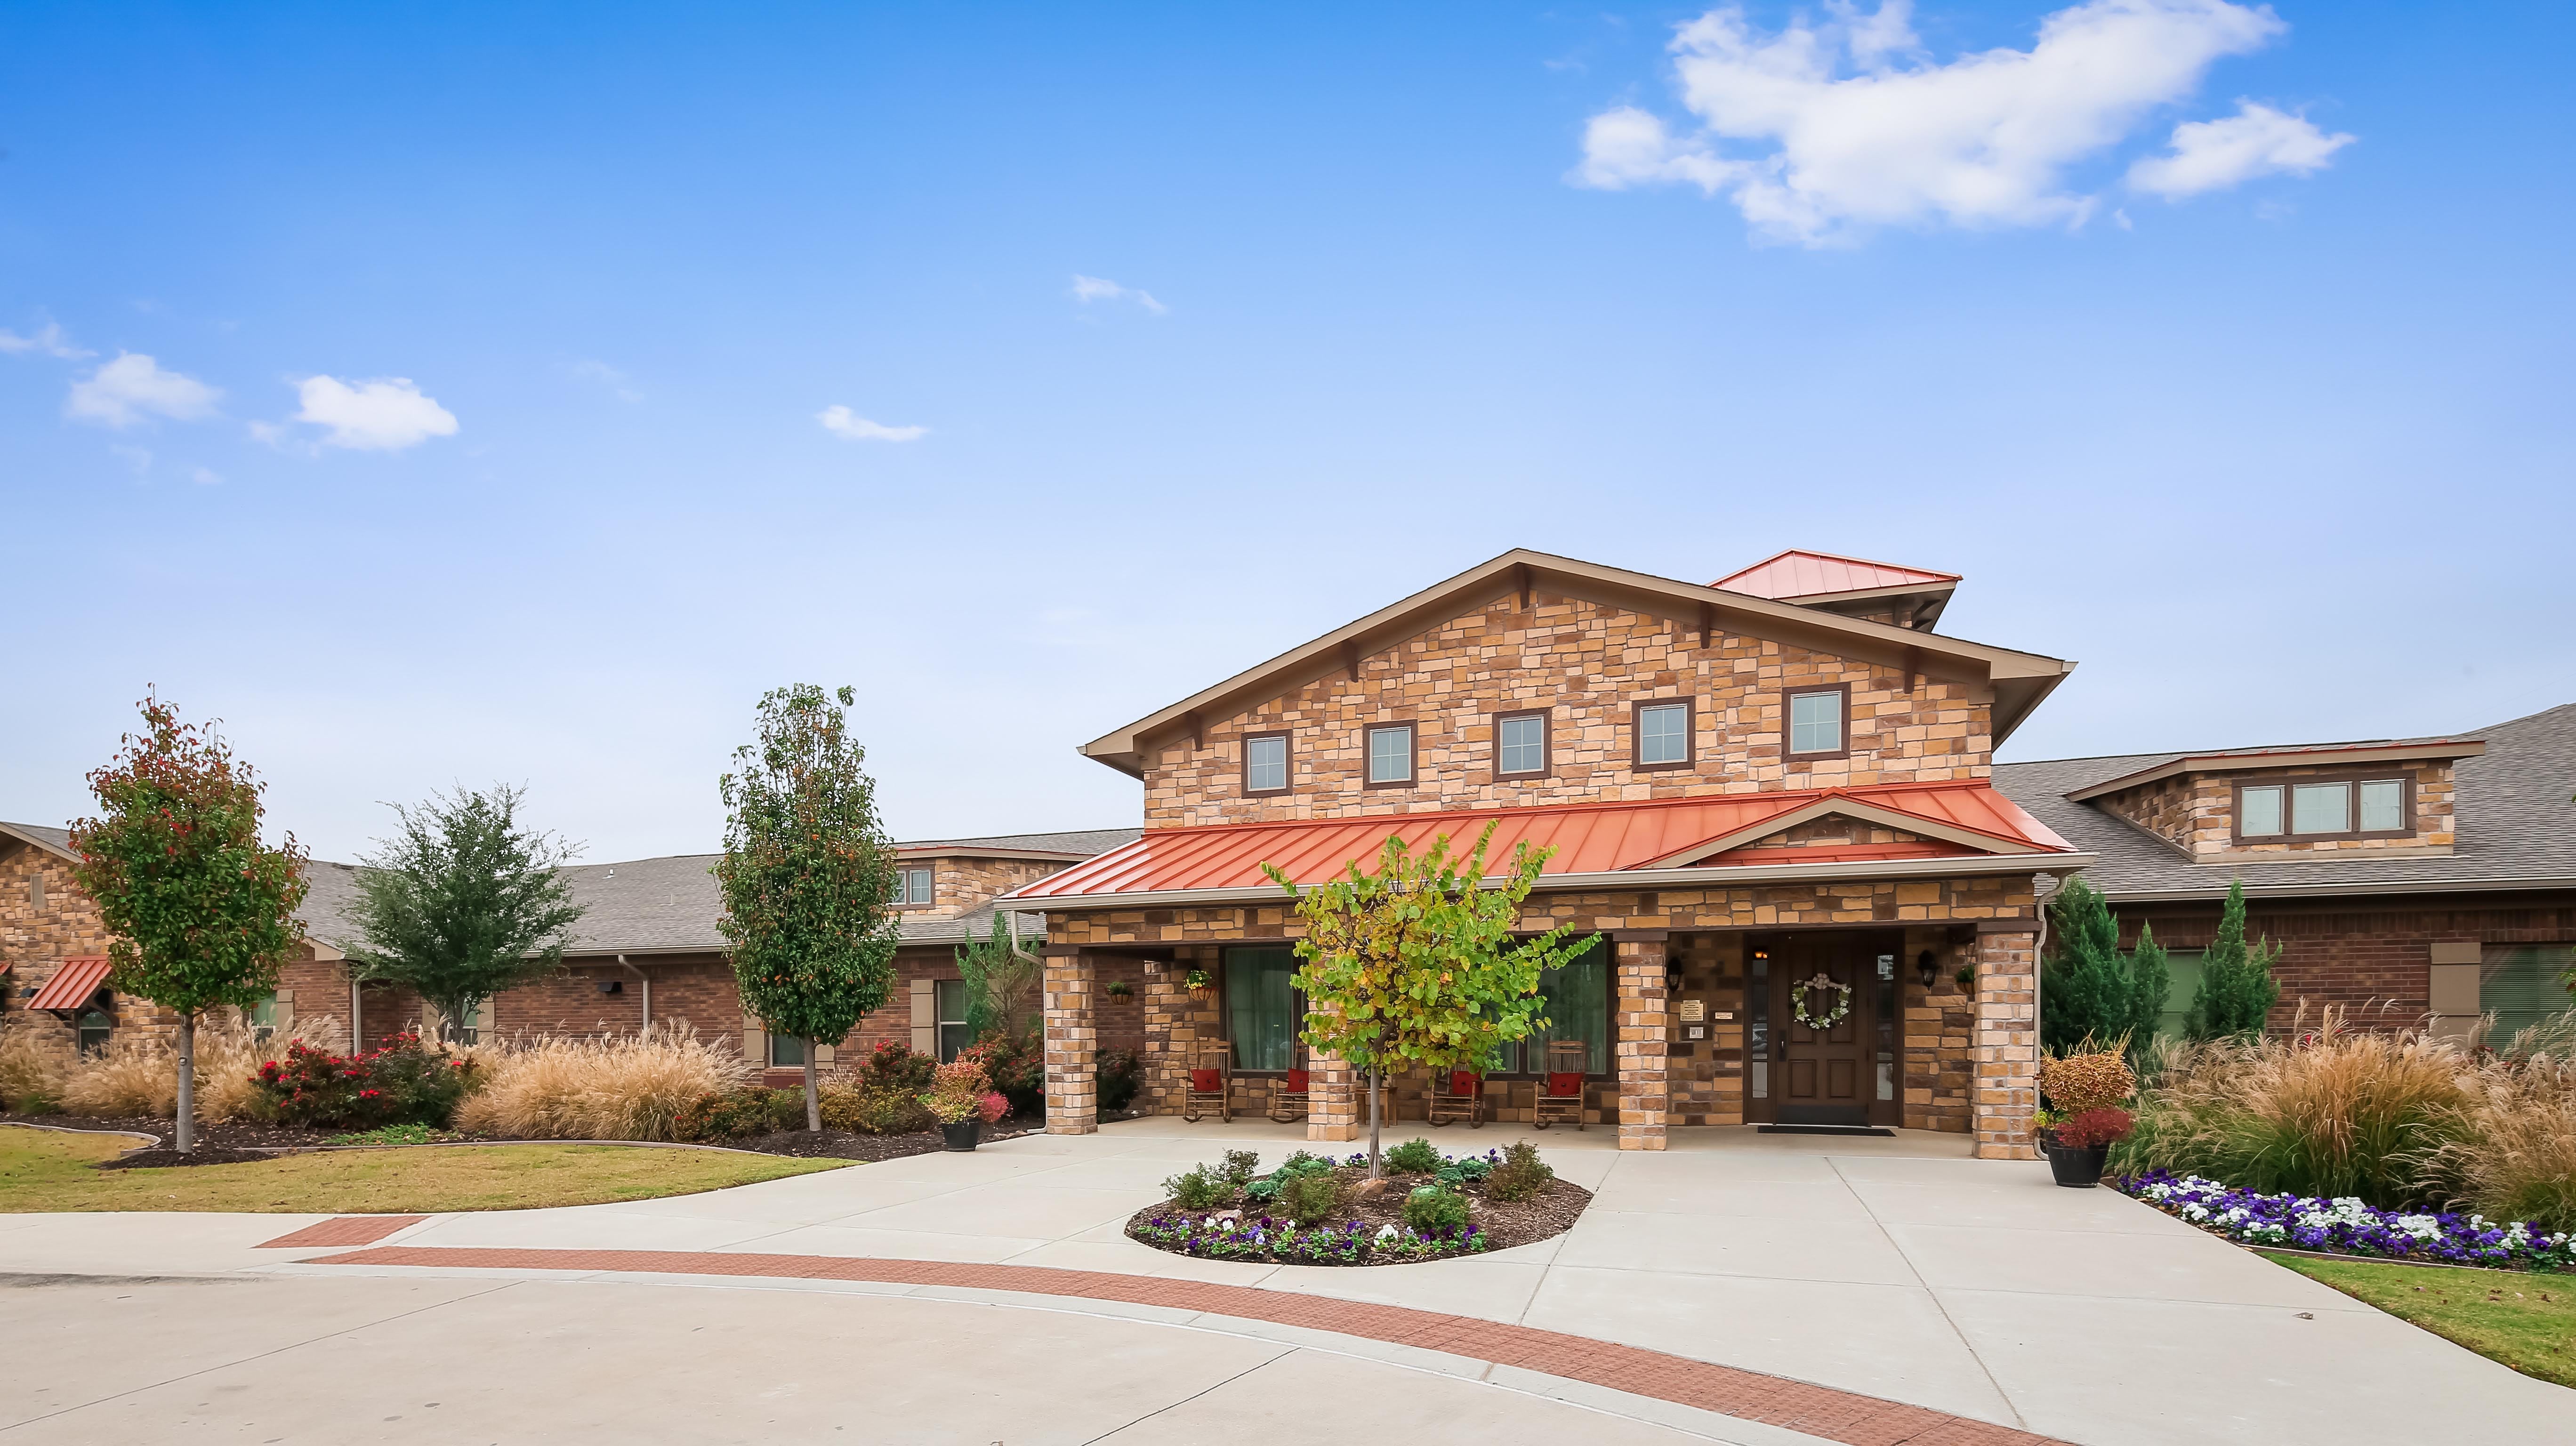 Meadowood Assisted Living and Memory Care community exterior